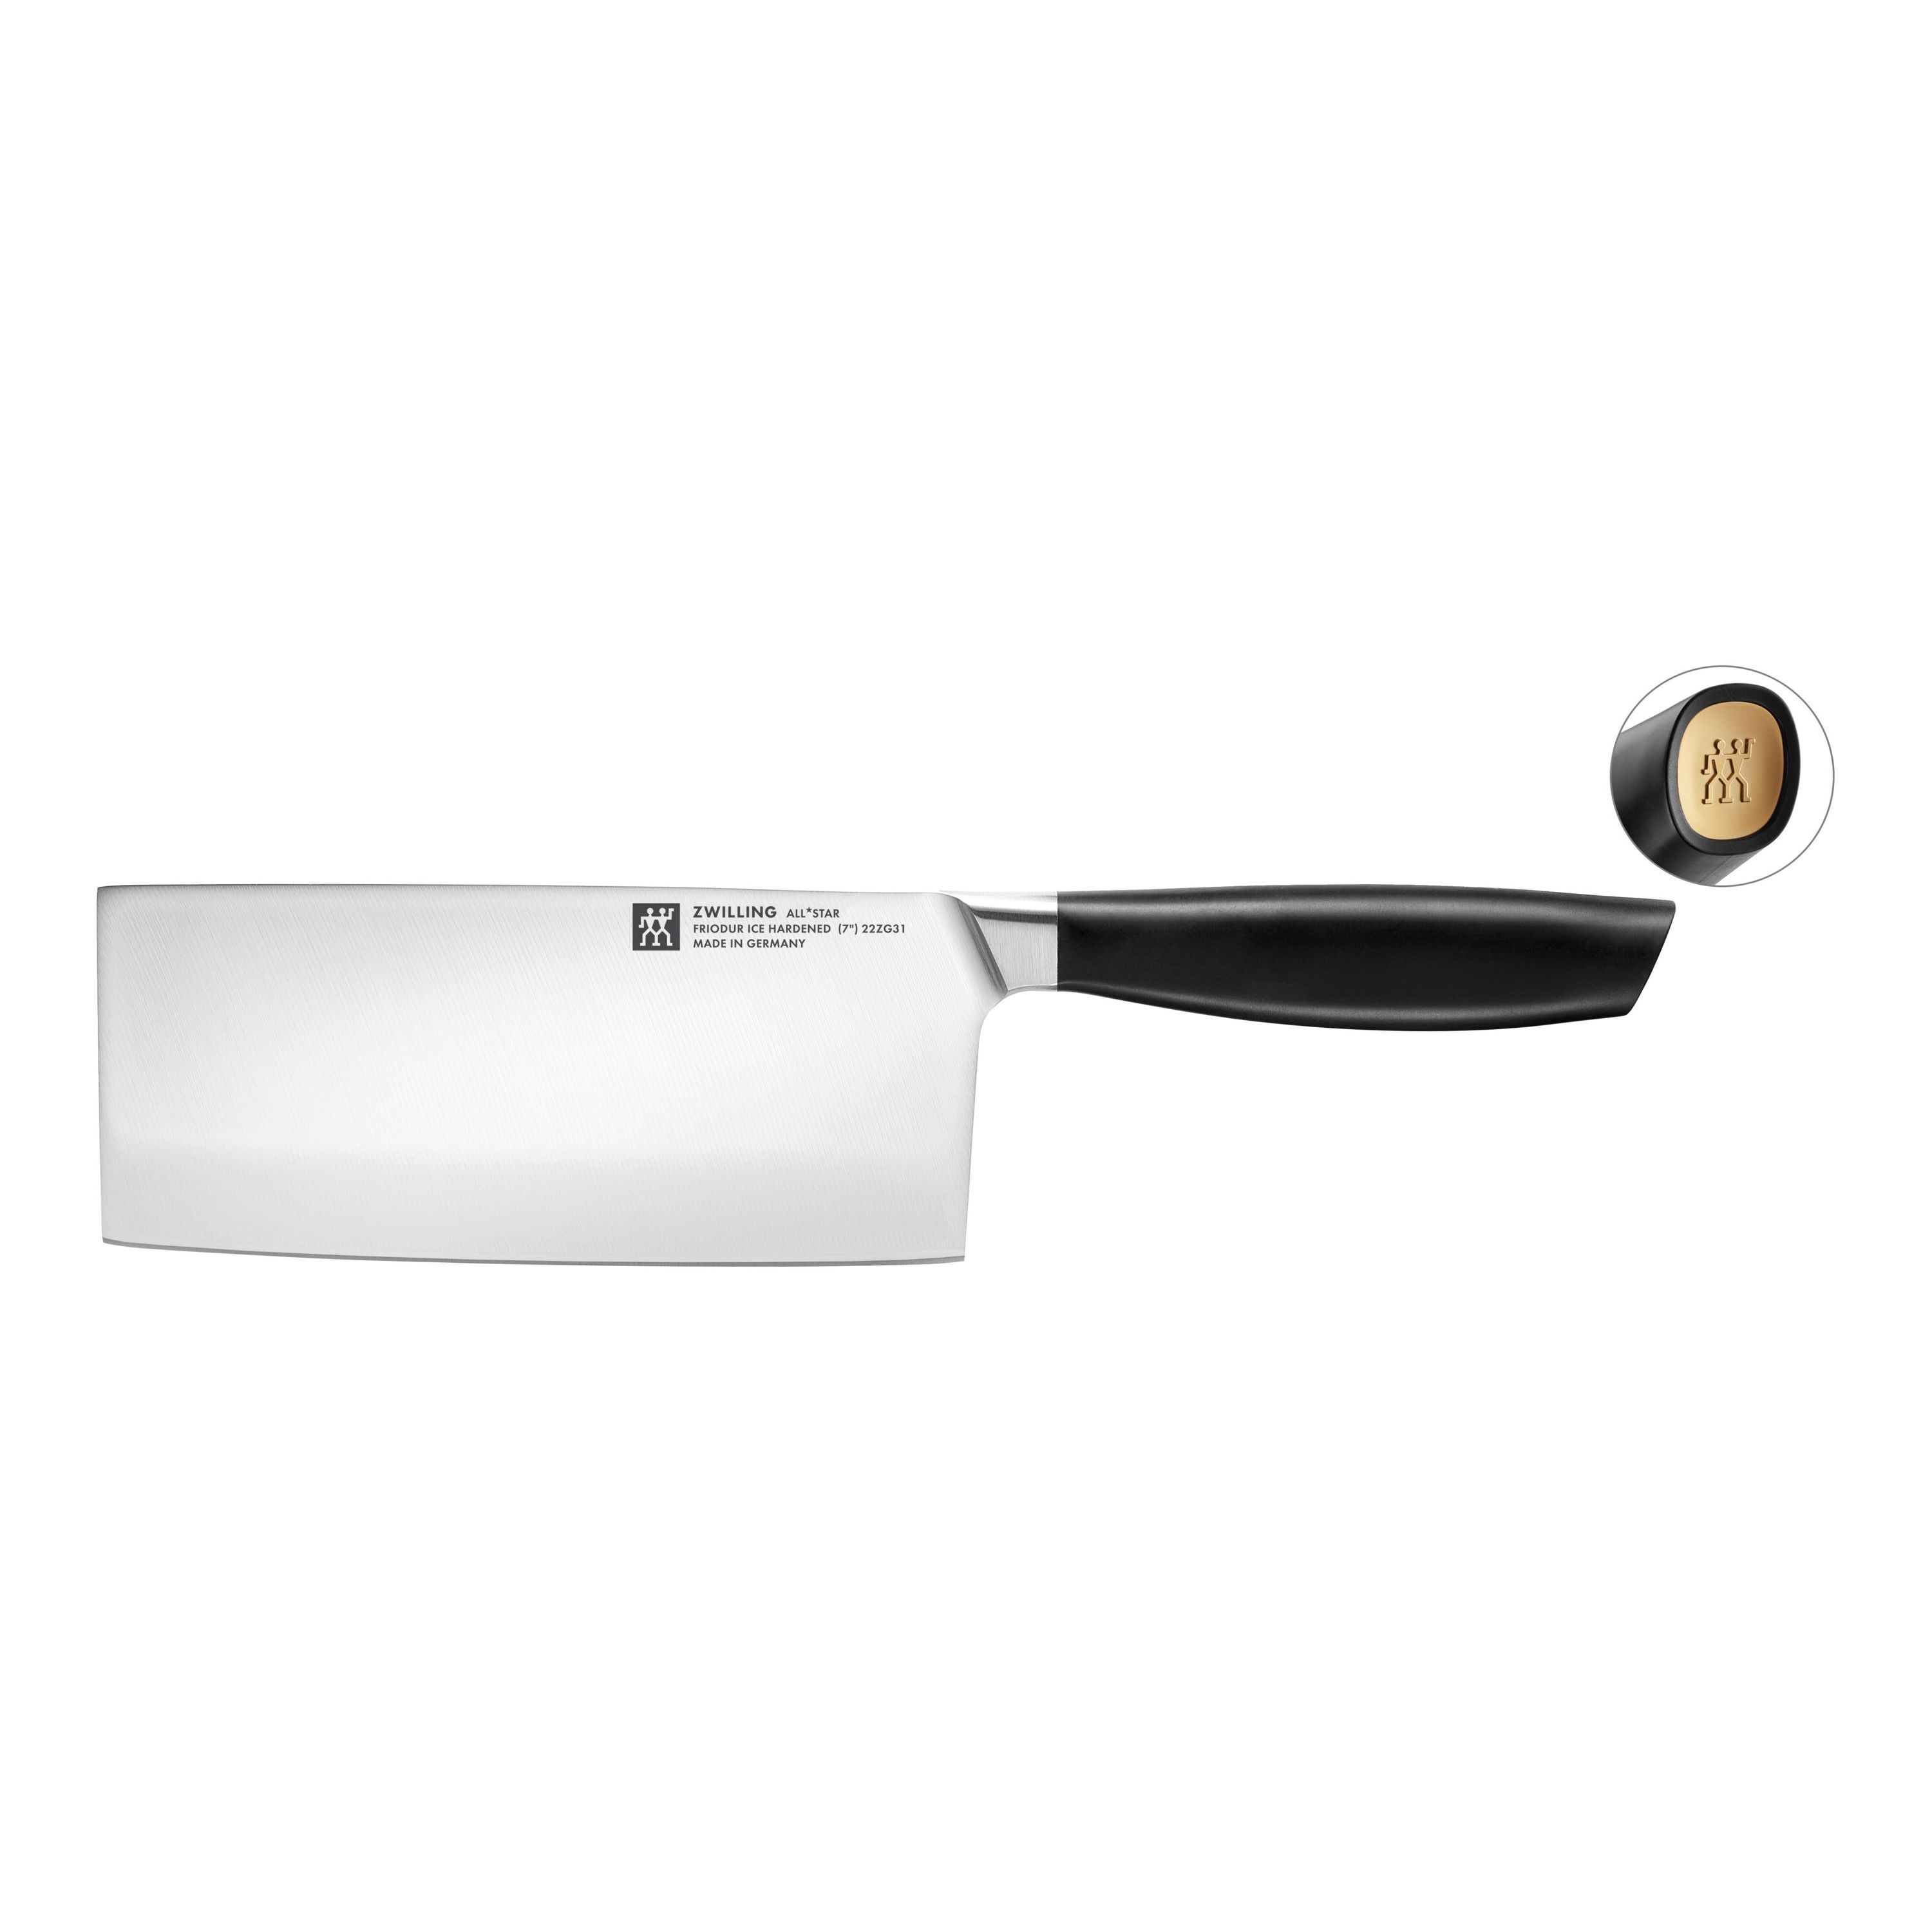 ZWILLING All * Star Couteau de chef chinois 18 cm, or mat